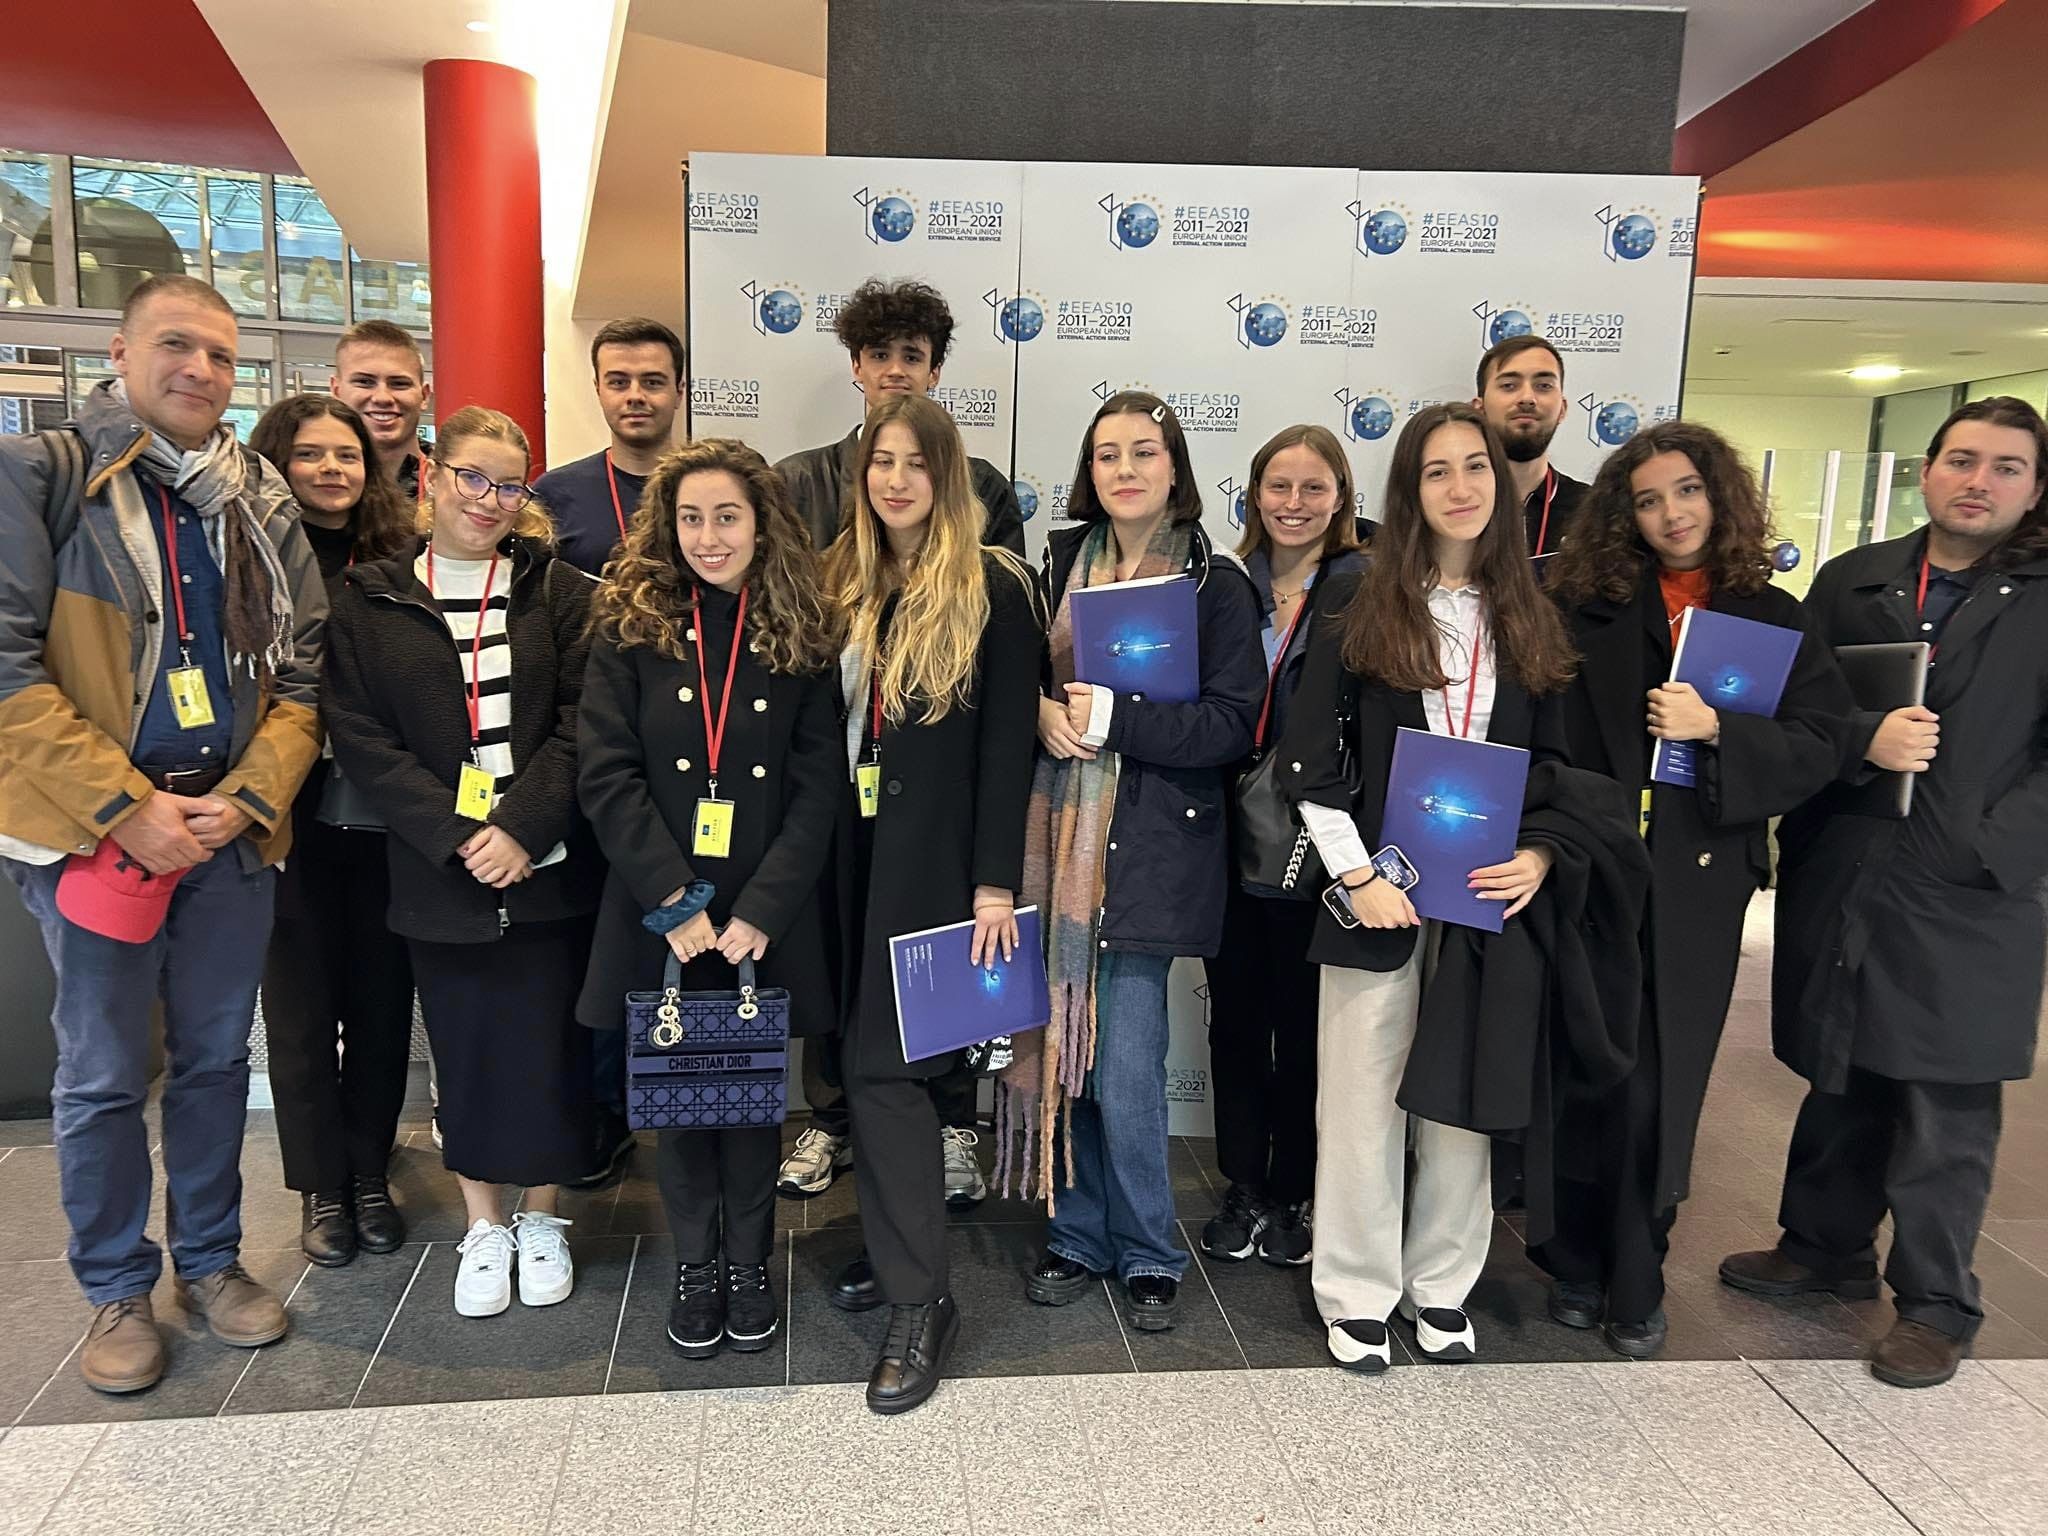 AUBG students at the European External Action Service. Photo credit: Jean Crombois.